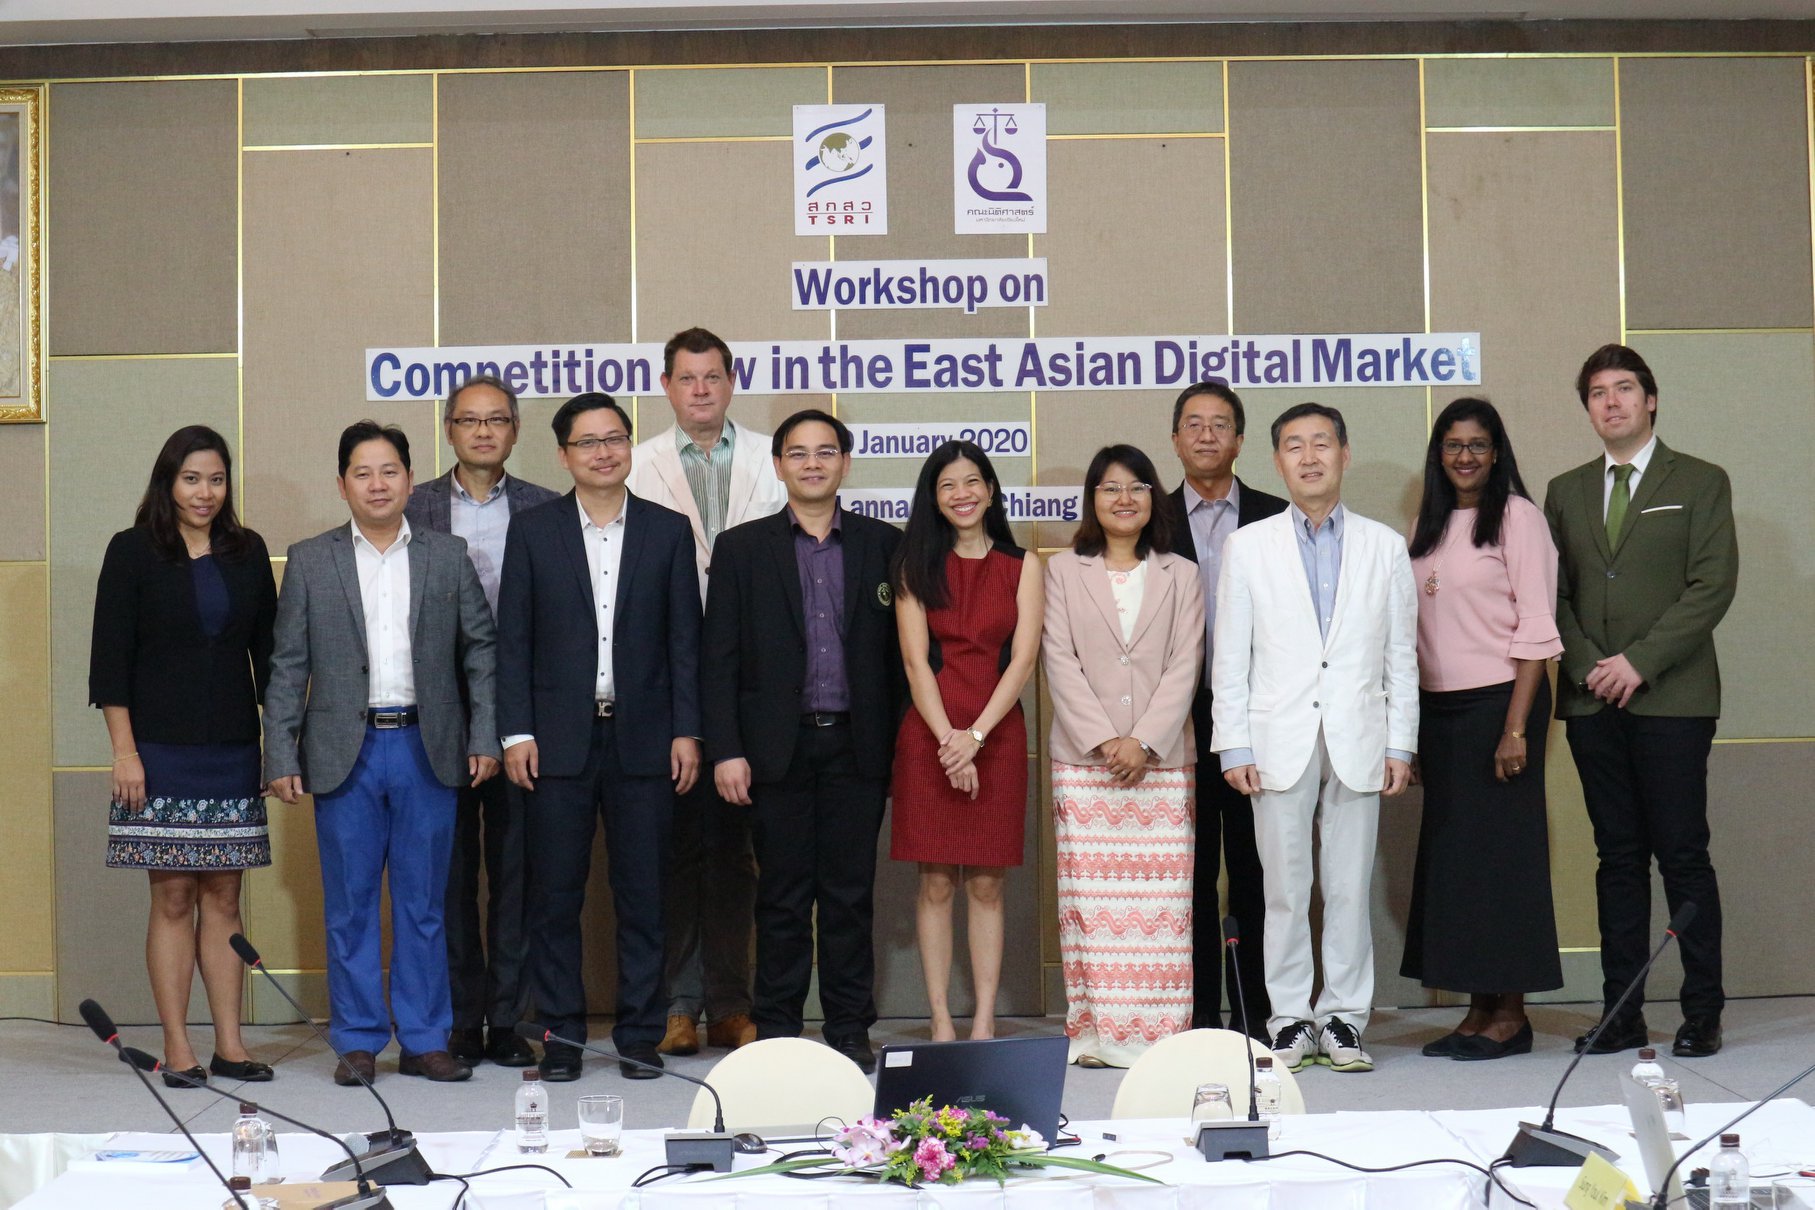 Workshop on Competition Law in the East Asian Digital Market